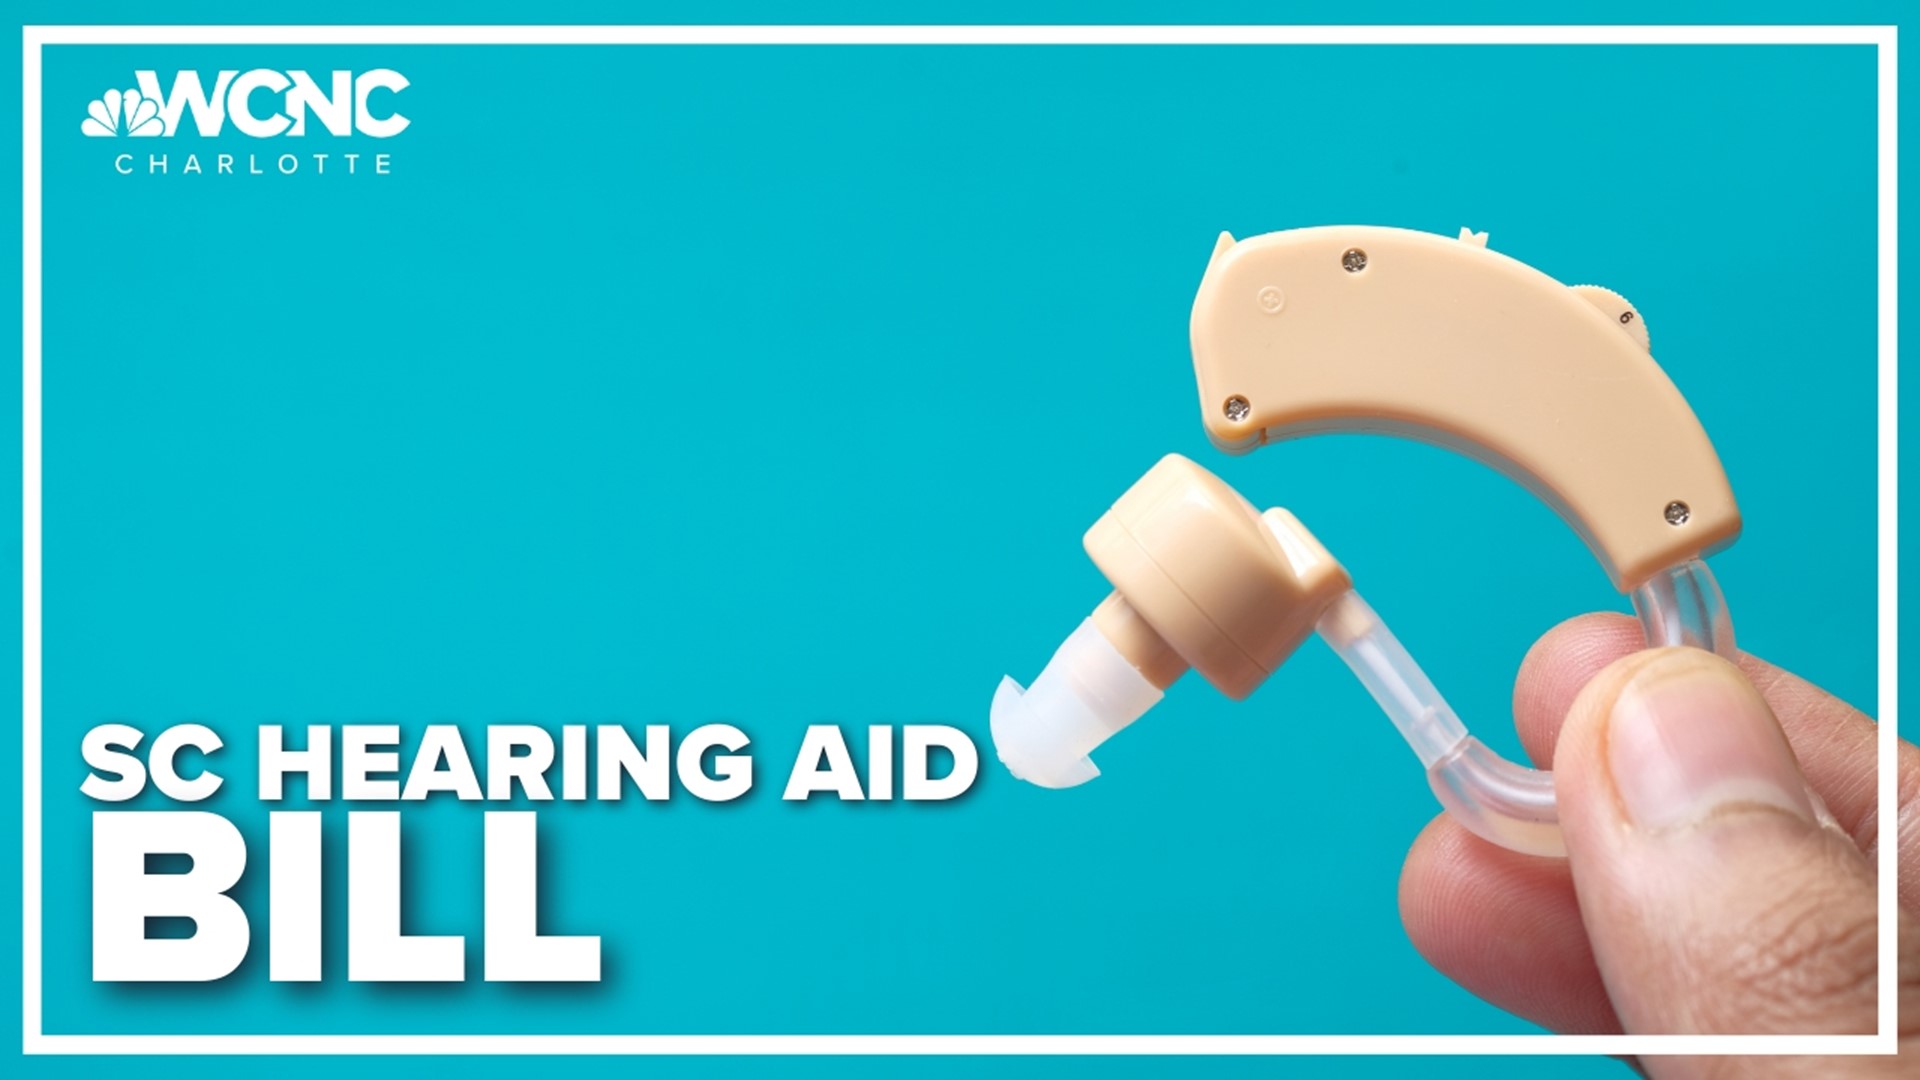 State lawmakers have proposed a bill requiring insurance companies to cover the cost of hearing aids for children.